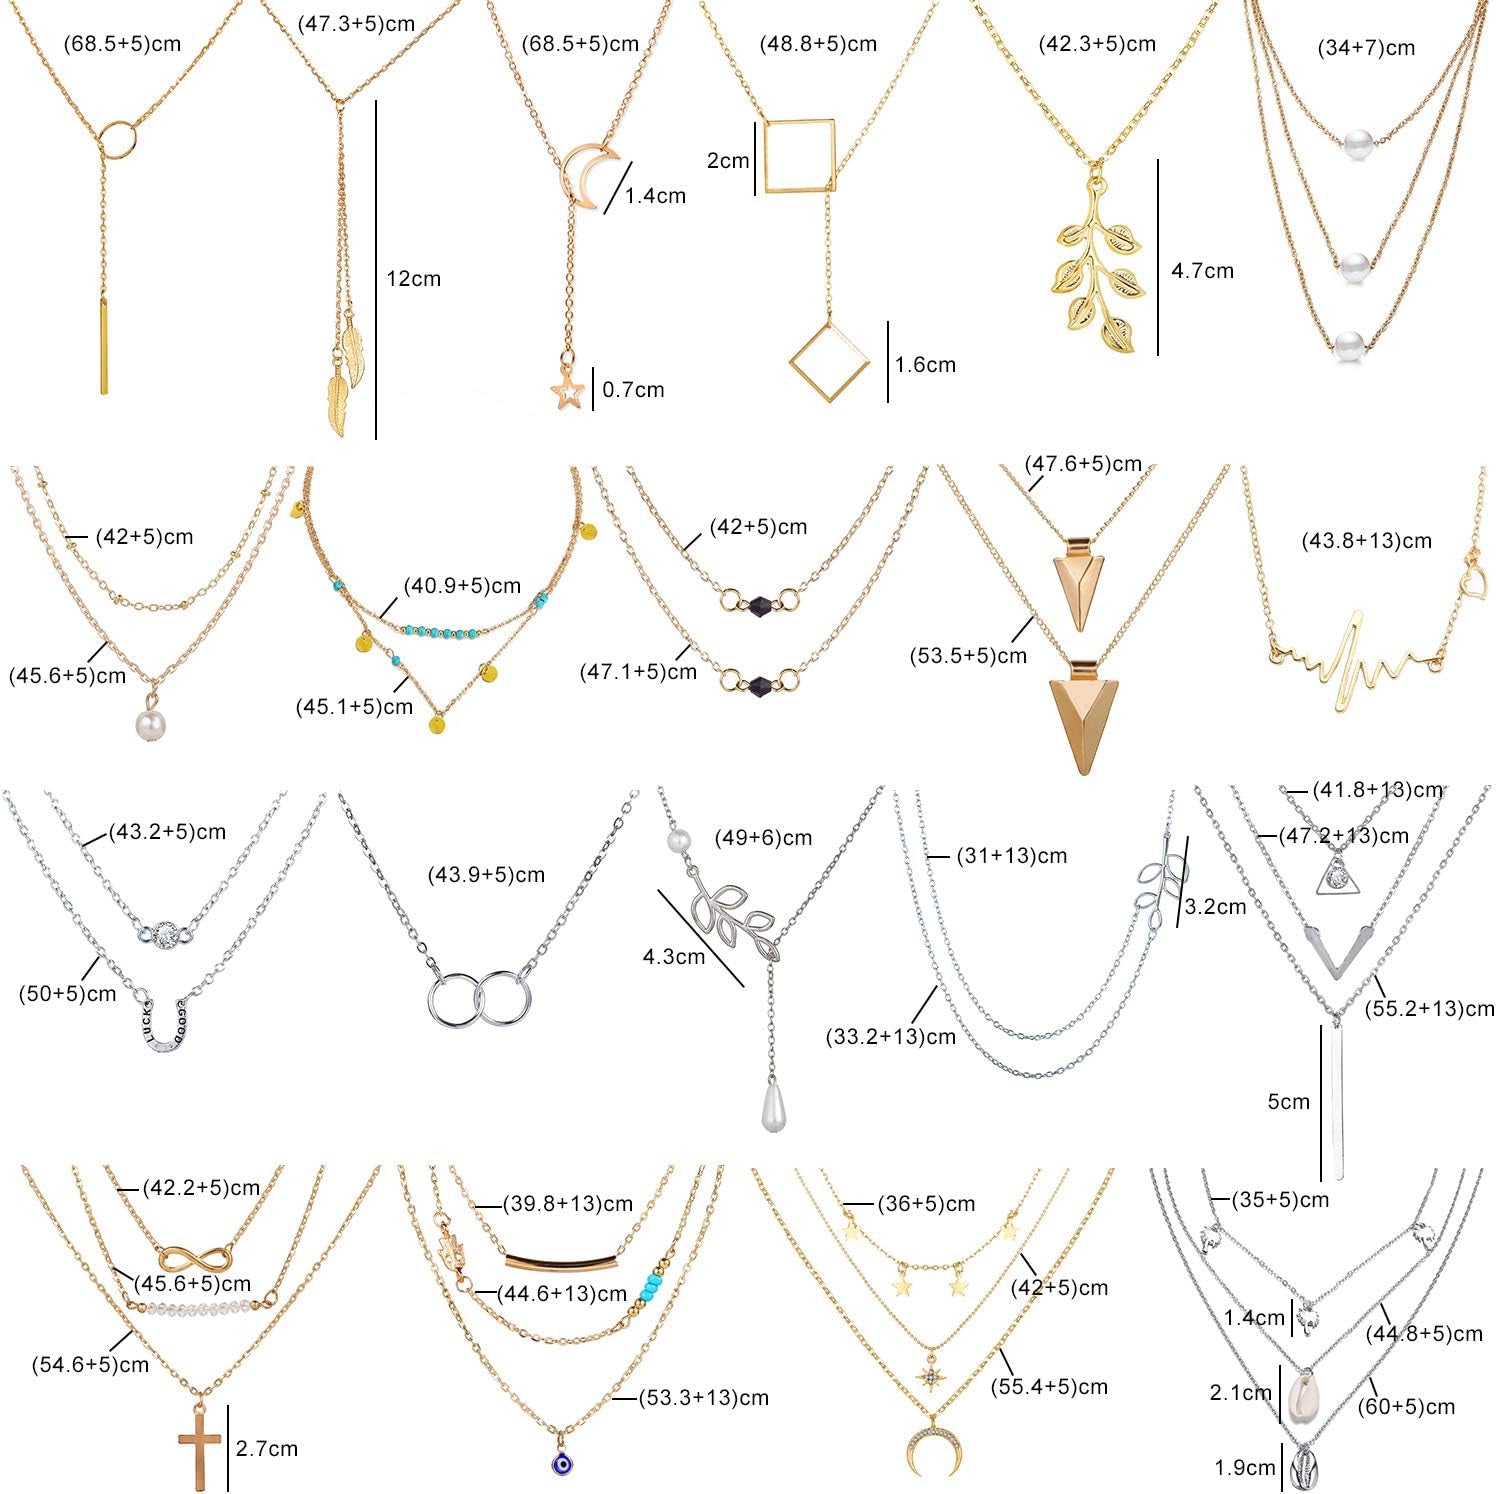 20 PCS Pendant Necklace with 14 PCS Gold,6 PCS Sliver,20 Styles of Necklaces for Women Girls Jewelry Fashion and Valentine Birthday Party Gift